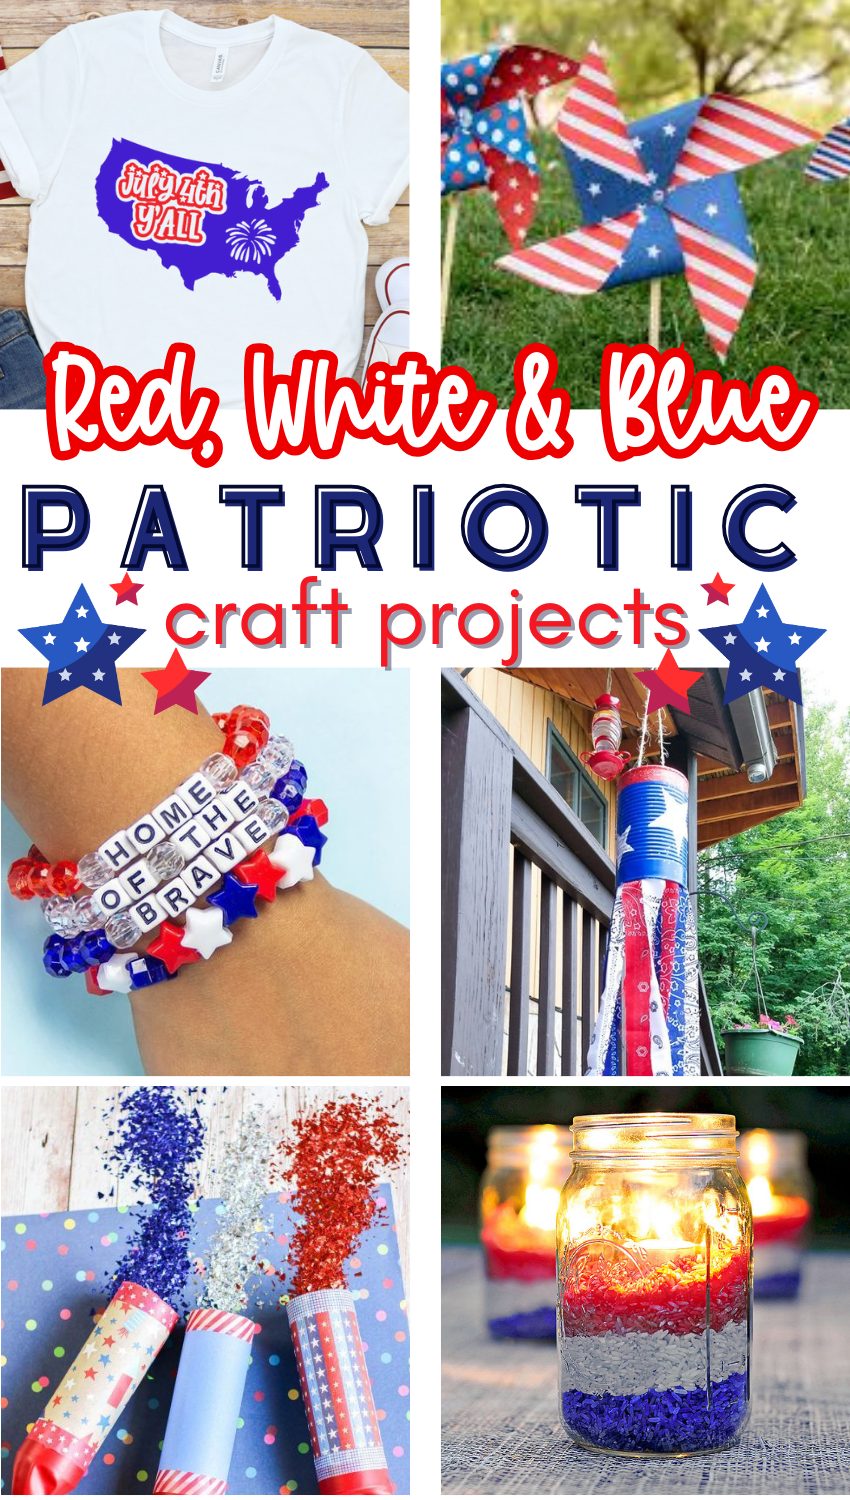 Red White and Blue Patriotic Craft Projects